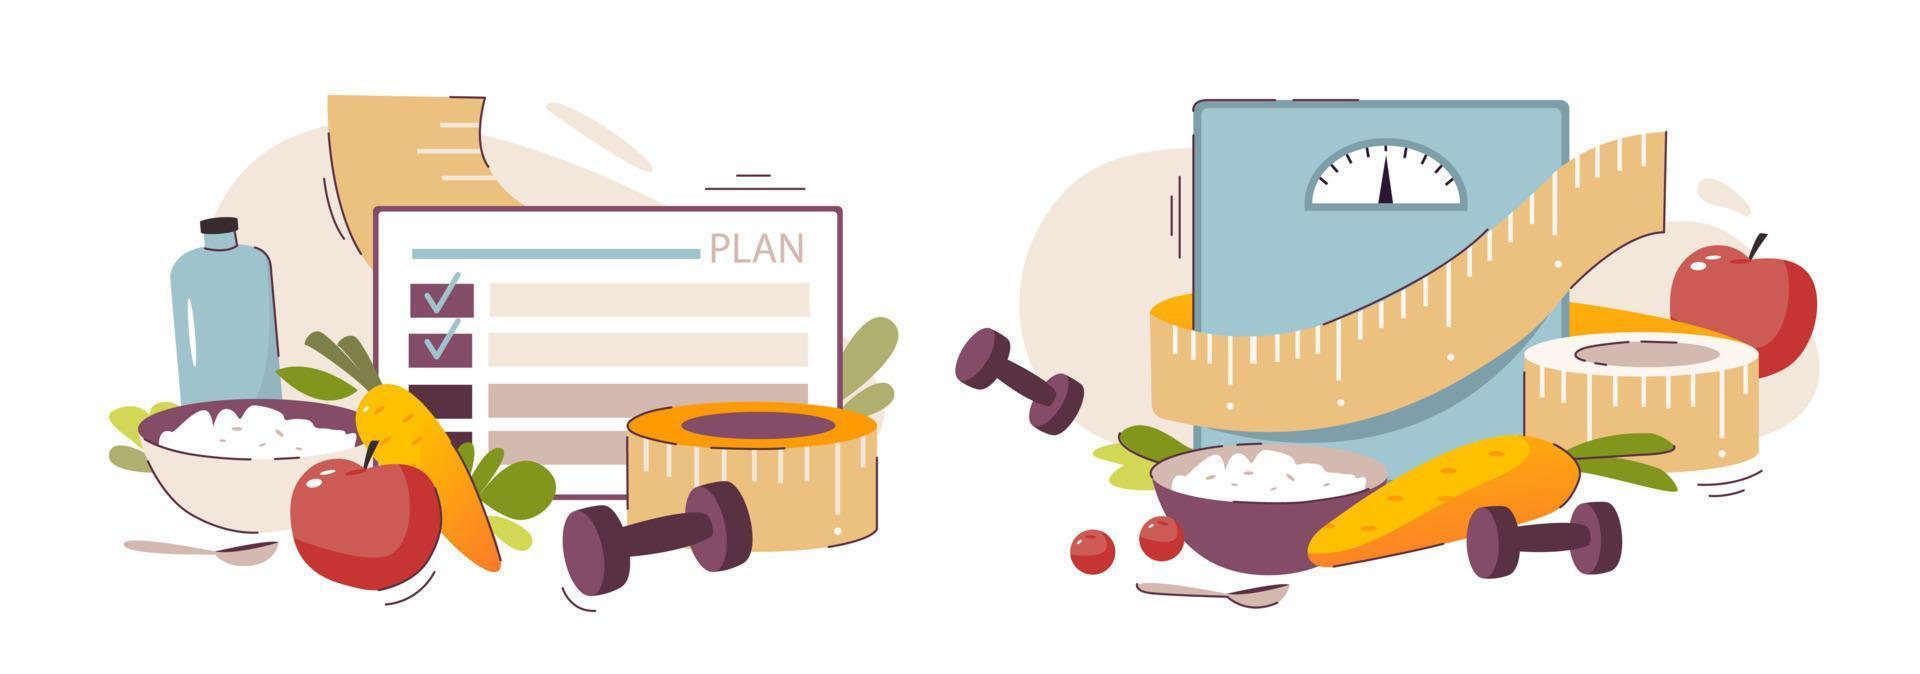 Nutritionist concept. Weight loss program. Concept of healthy food, meal planning, nutrition consultation, balance diet program.  Flat vector illustration